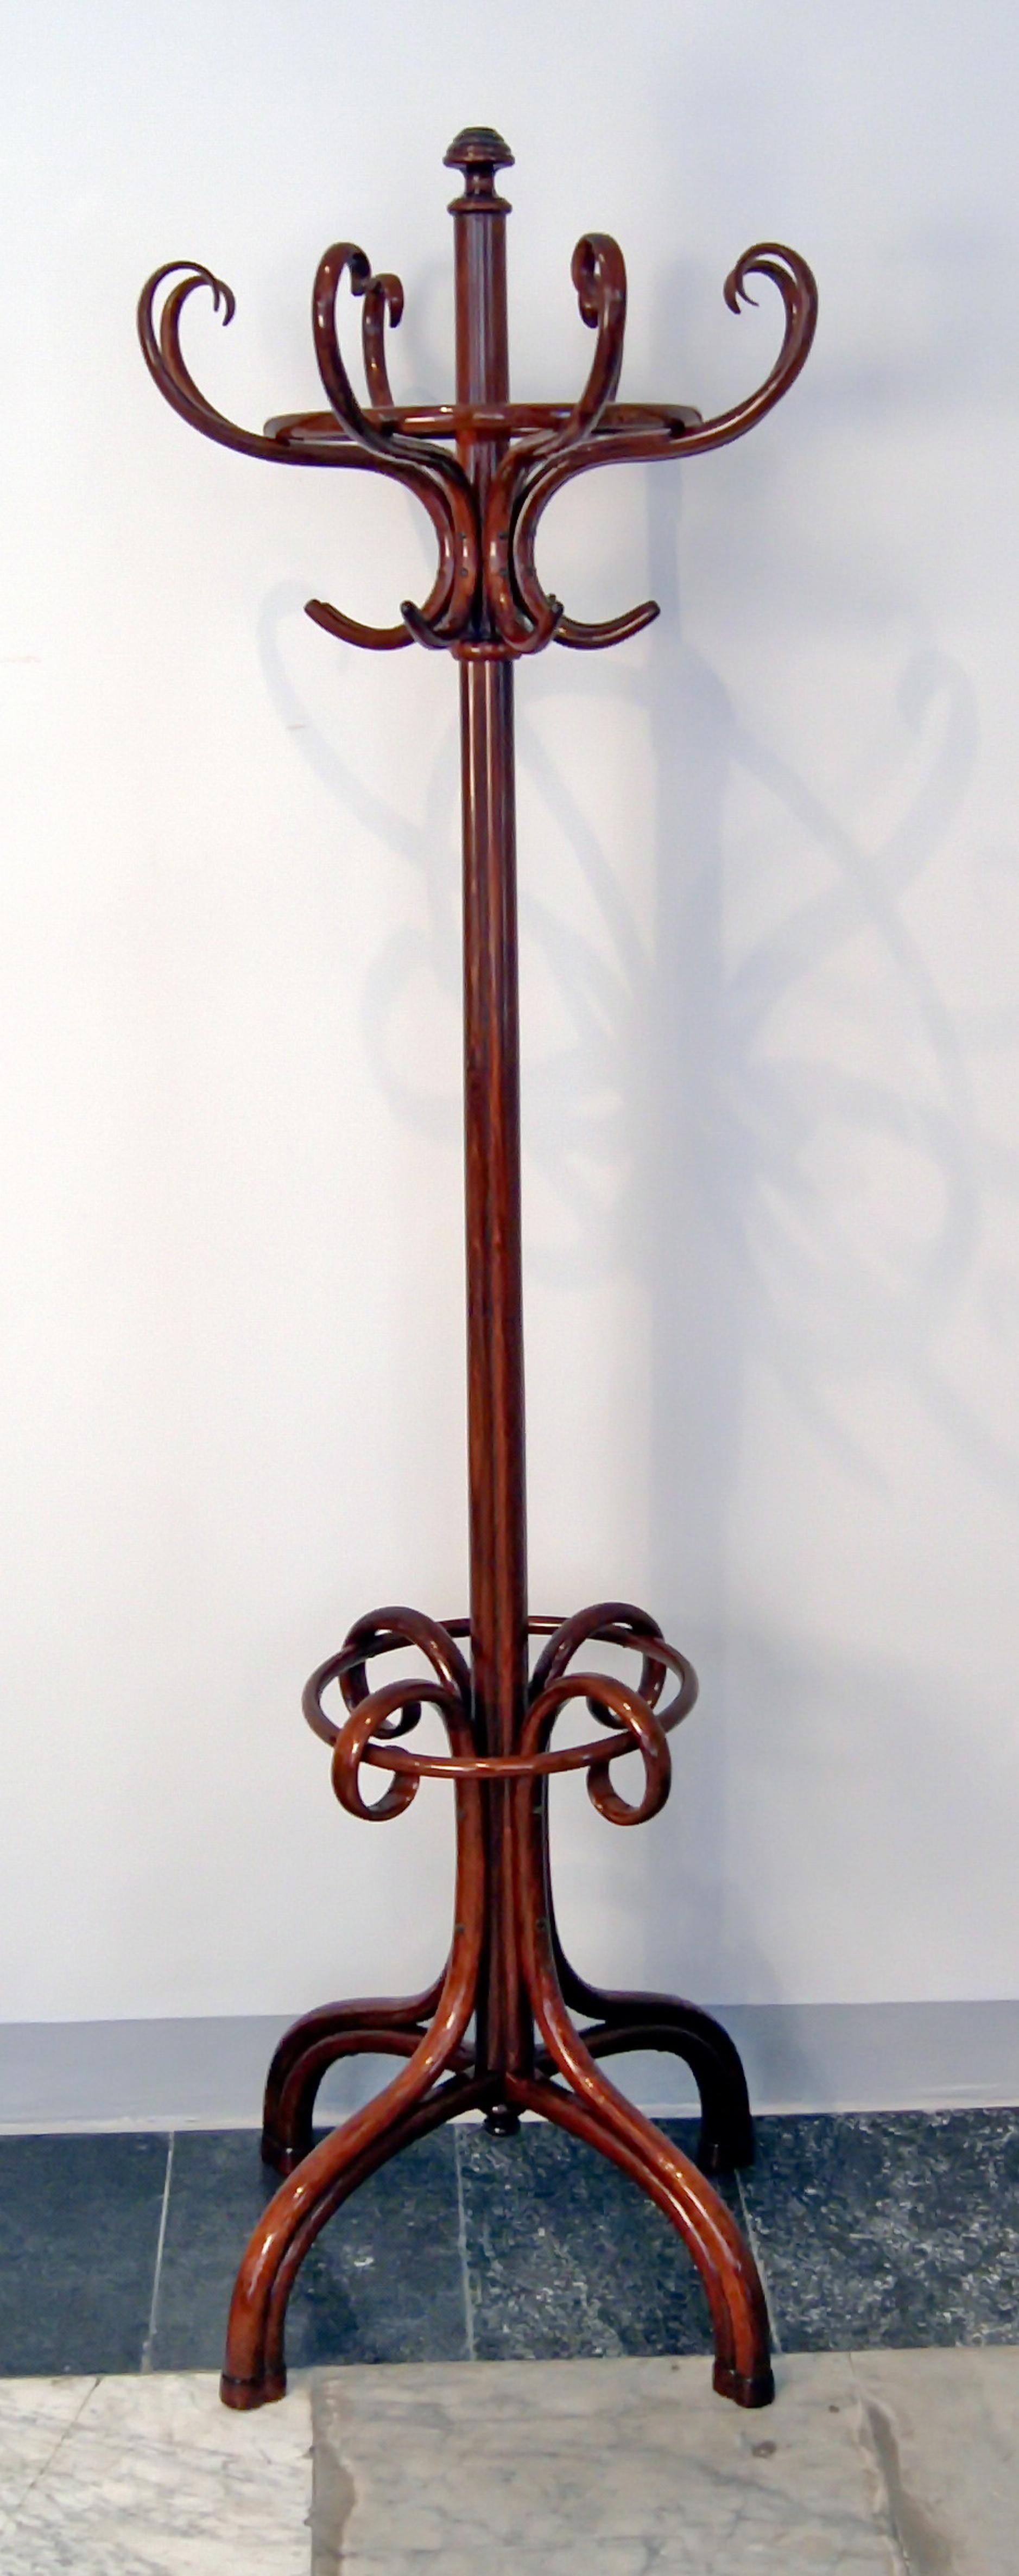 Thonet coat-tree / coat rack, model number 1 (authenticity guaranteed !)

beech wood, mahogany stained / high quality handwork / refurbished by hand
This Thonet coat-tree / coat rack is of finest form type: It is accentuated by various circular